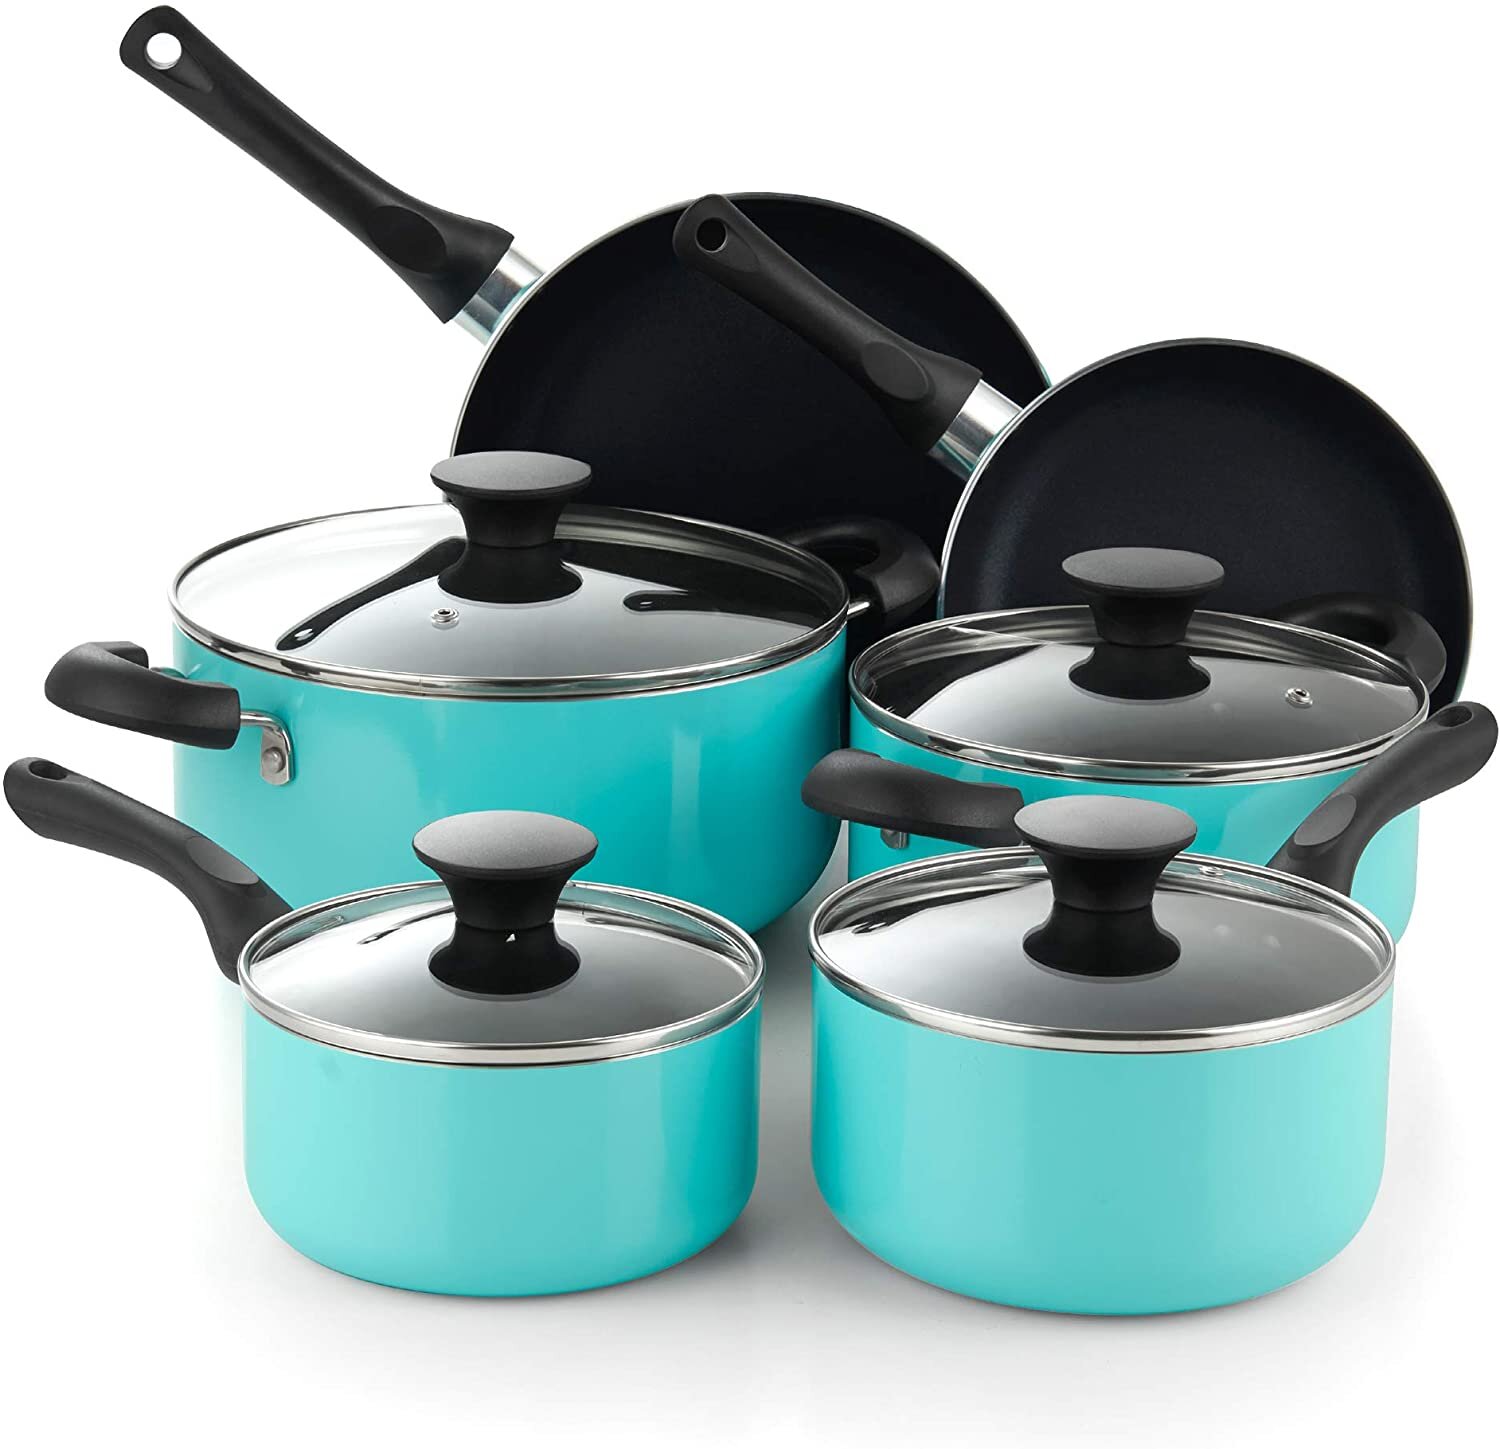 Kitchen - Cookware - Cookware Sets - Curtis Stone 10-Piece Cookware Set -  Online Shopping for Canadians